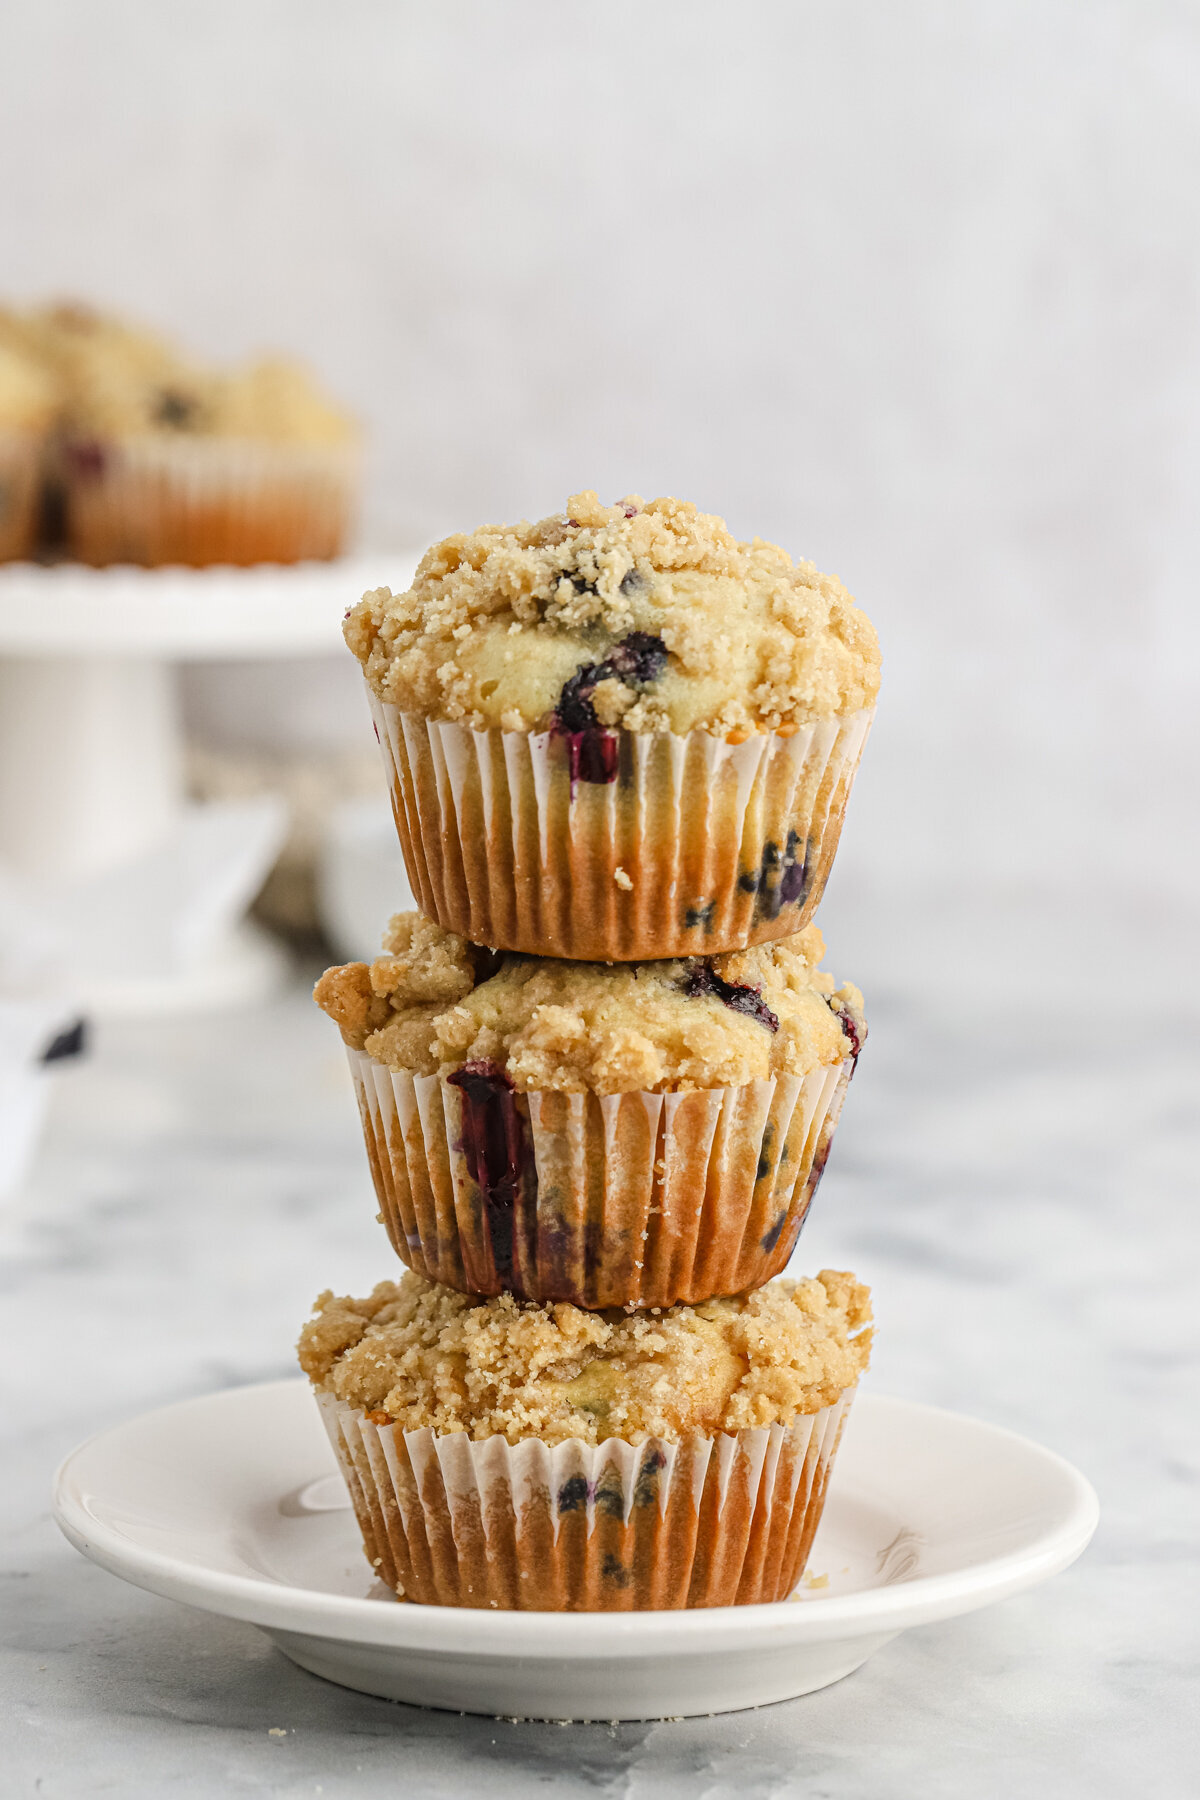 Perfect Blueberry Streusel Muffins 1200x1800-22